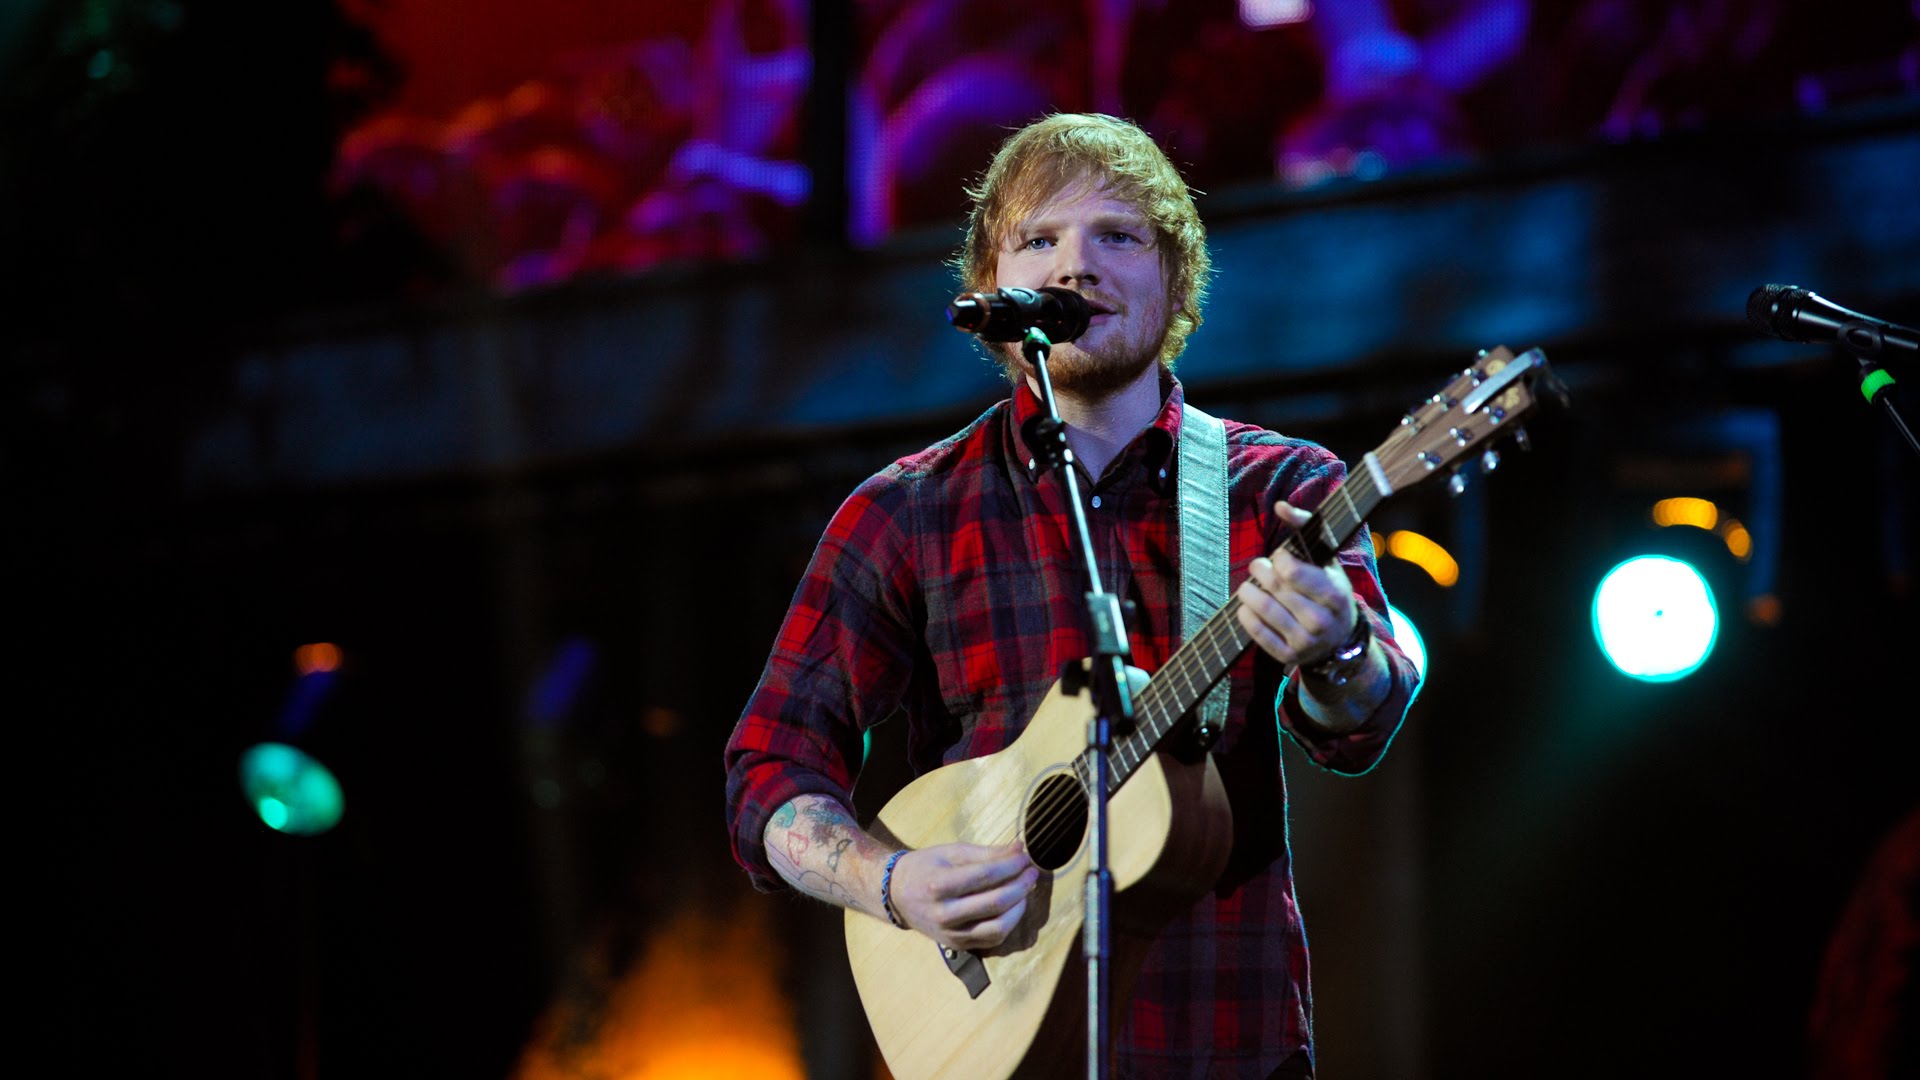 Ed Sheeran is Getting Sued for Copyright Infringement